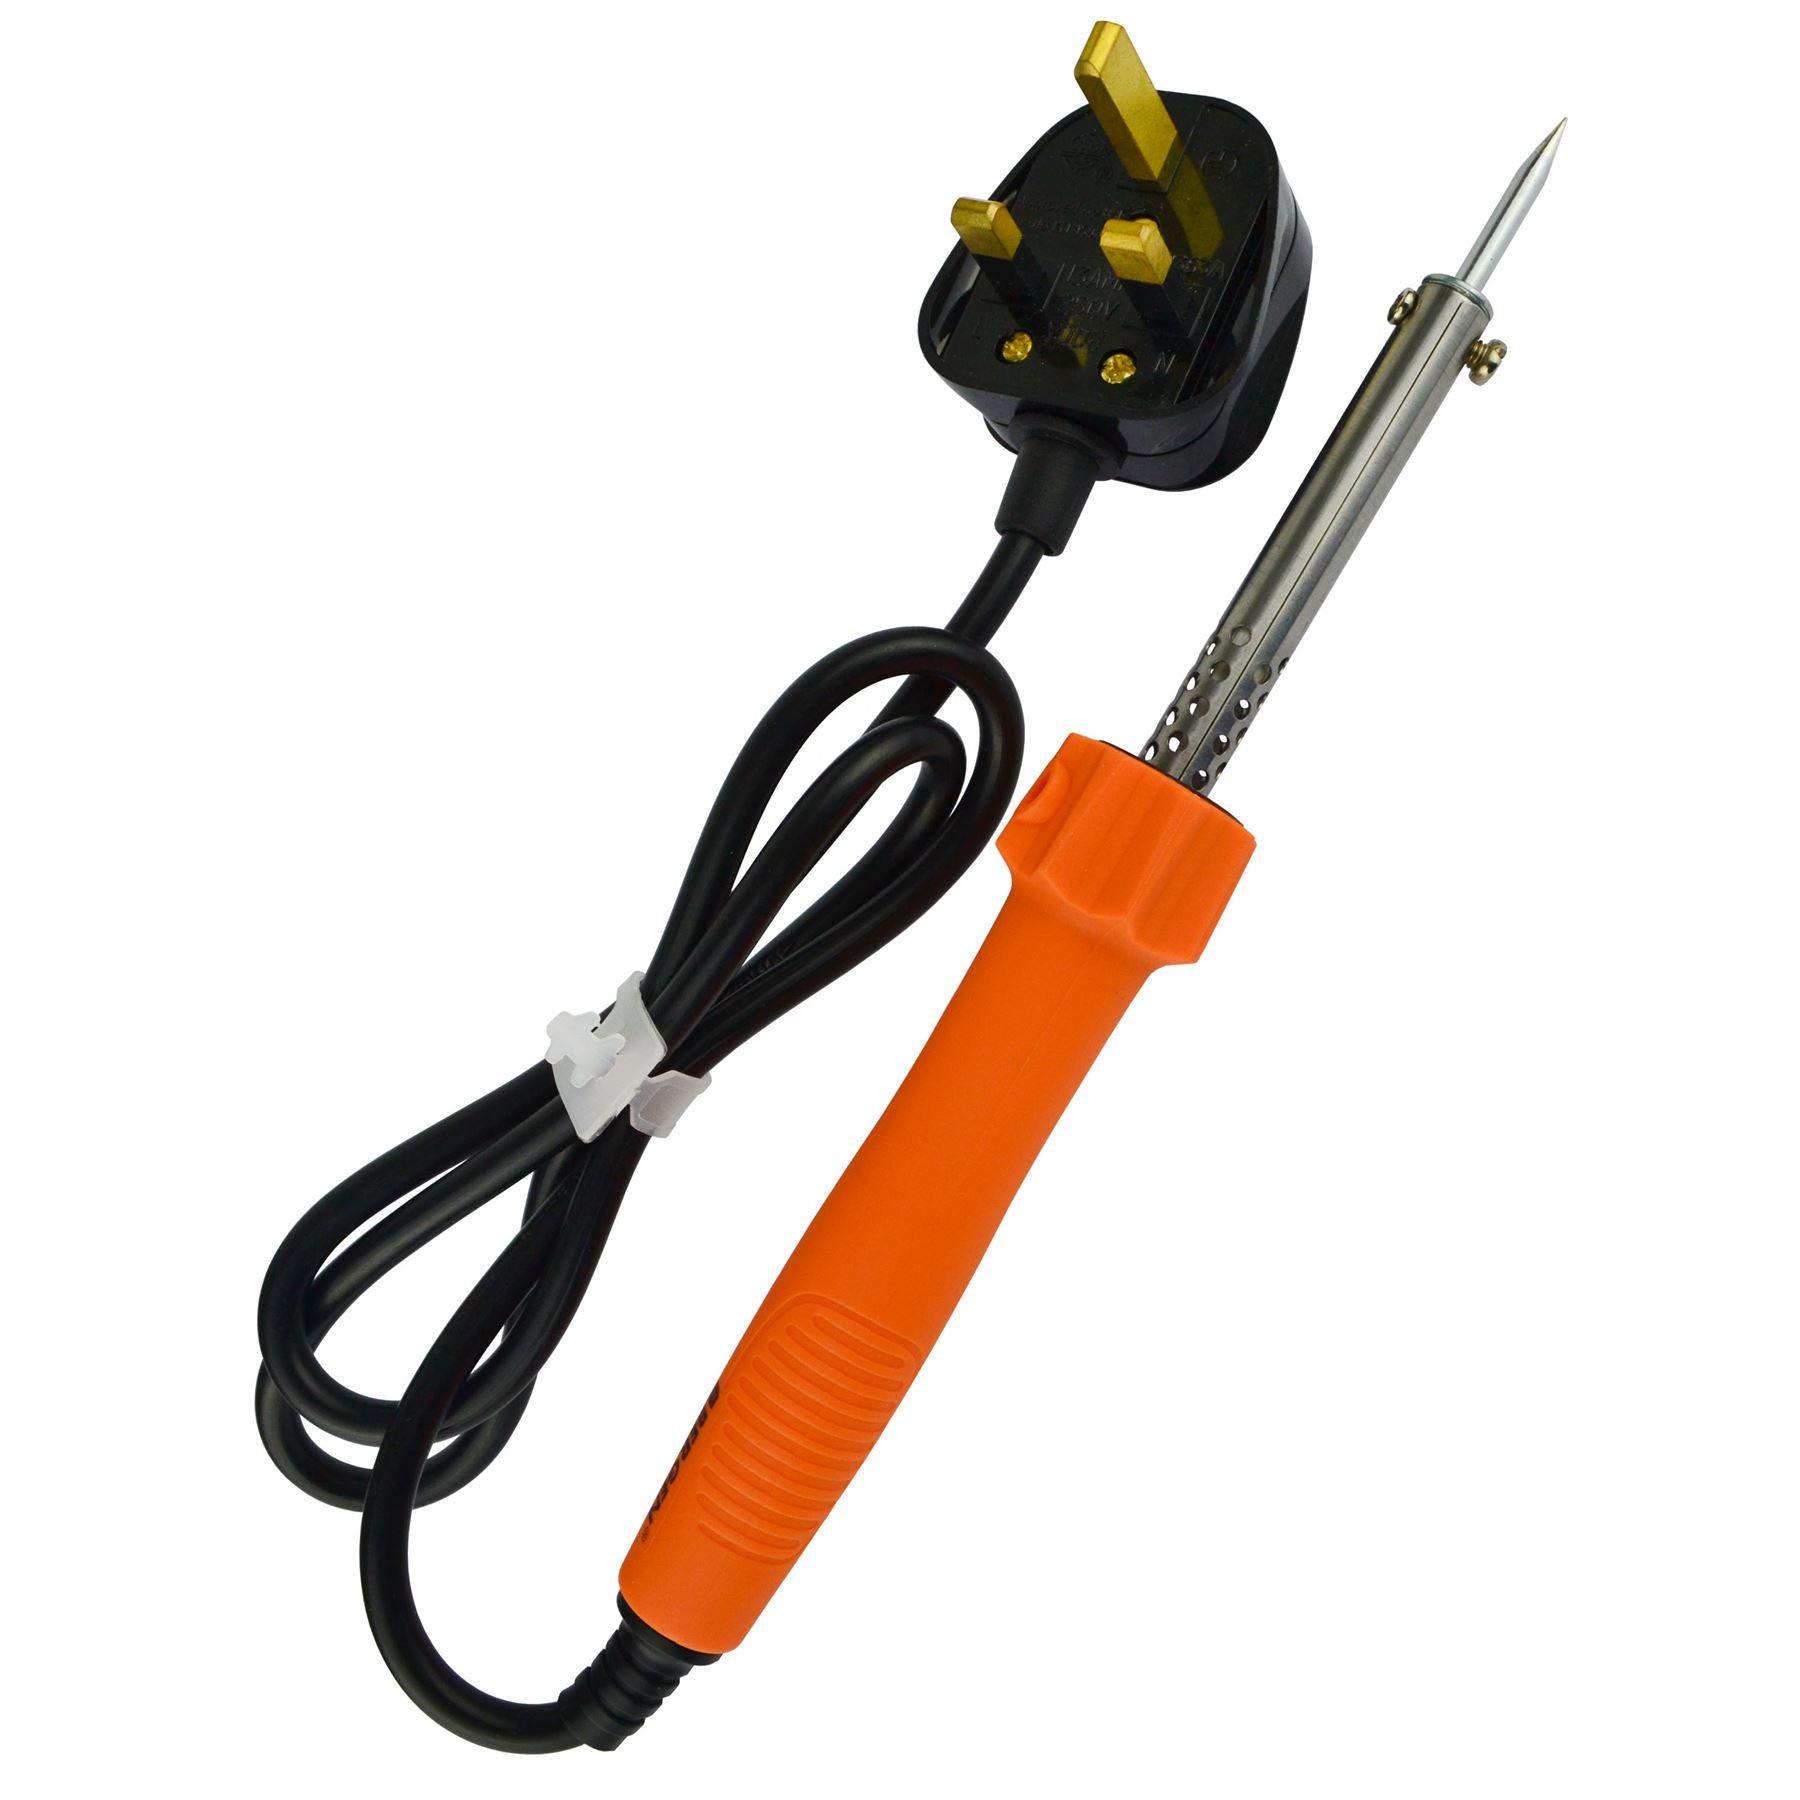 30W Soldering Iron Electric Solder 230v With Copper Tip By BERGEN AT215